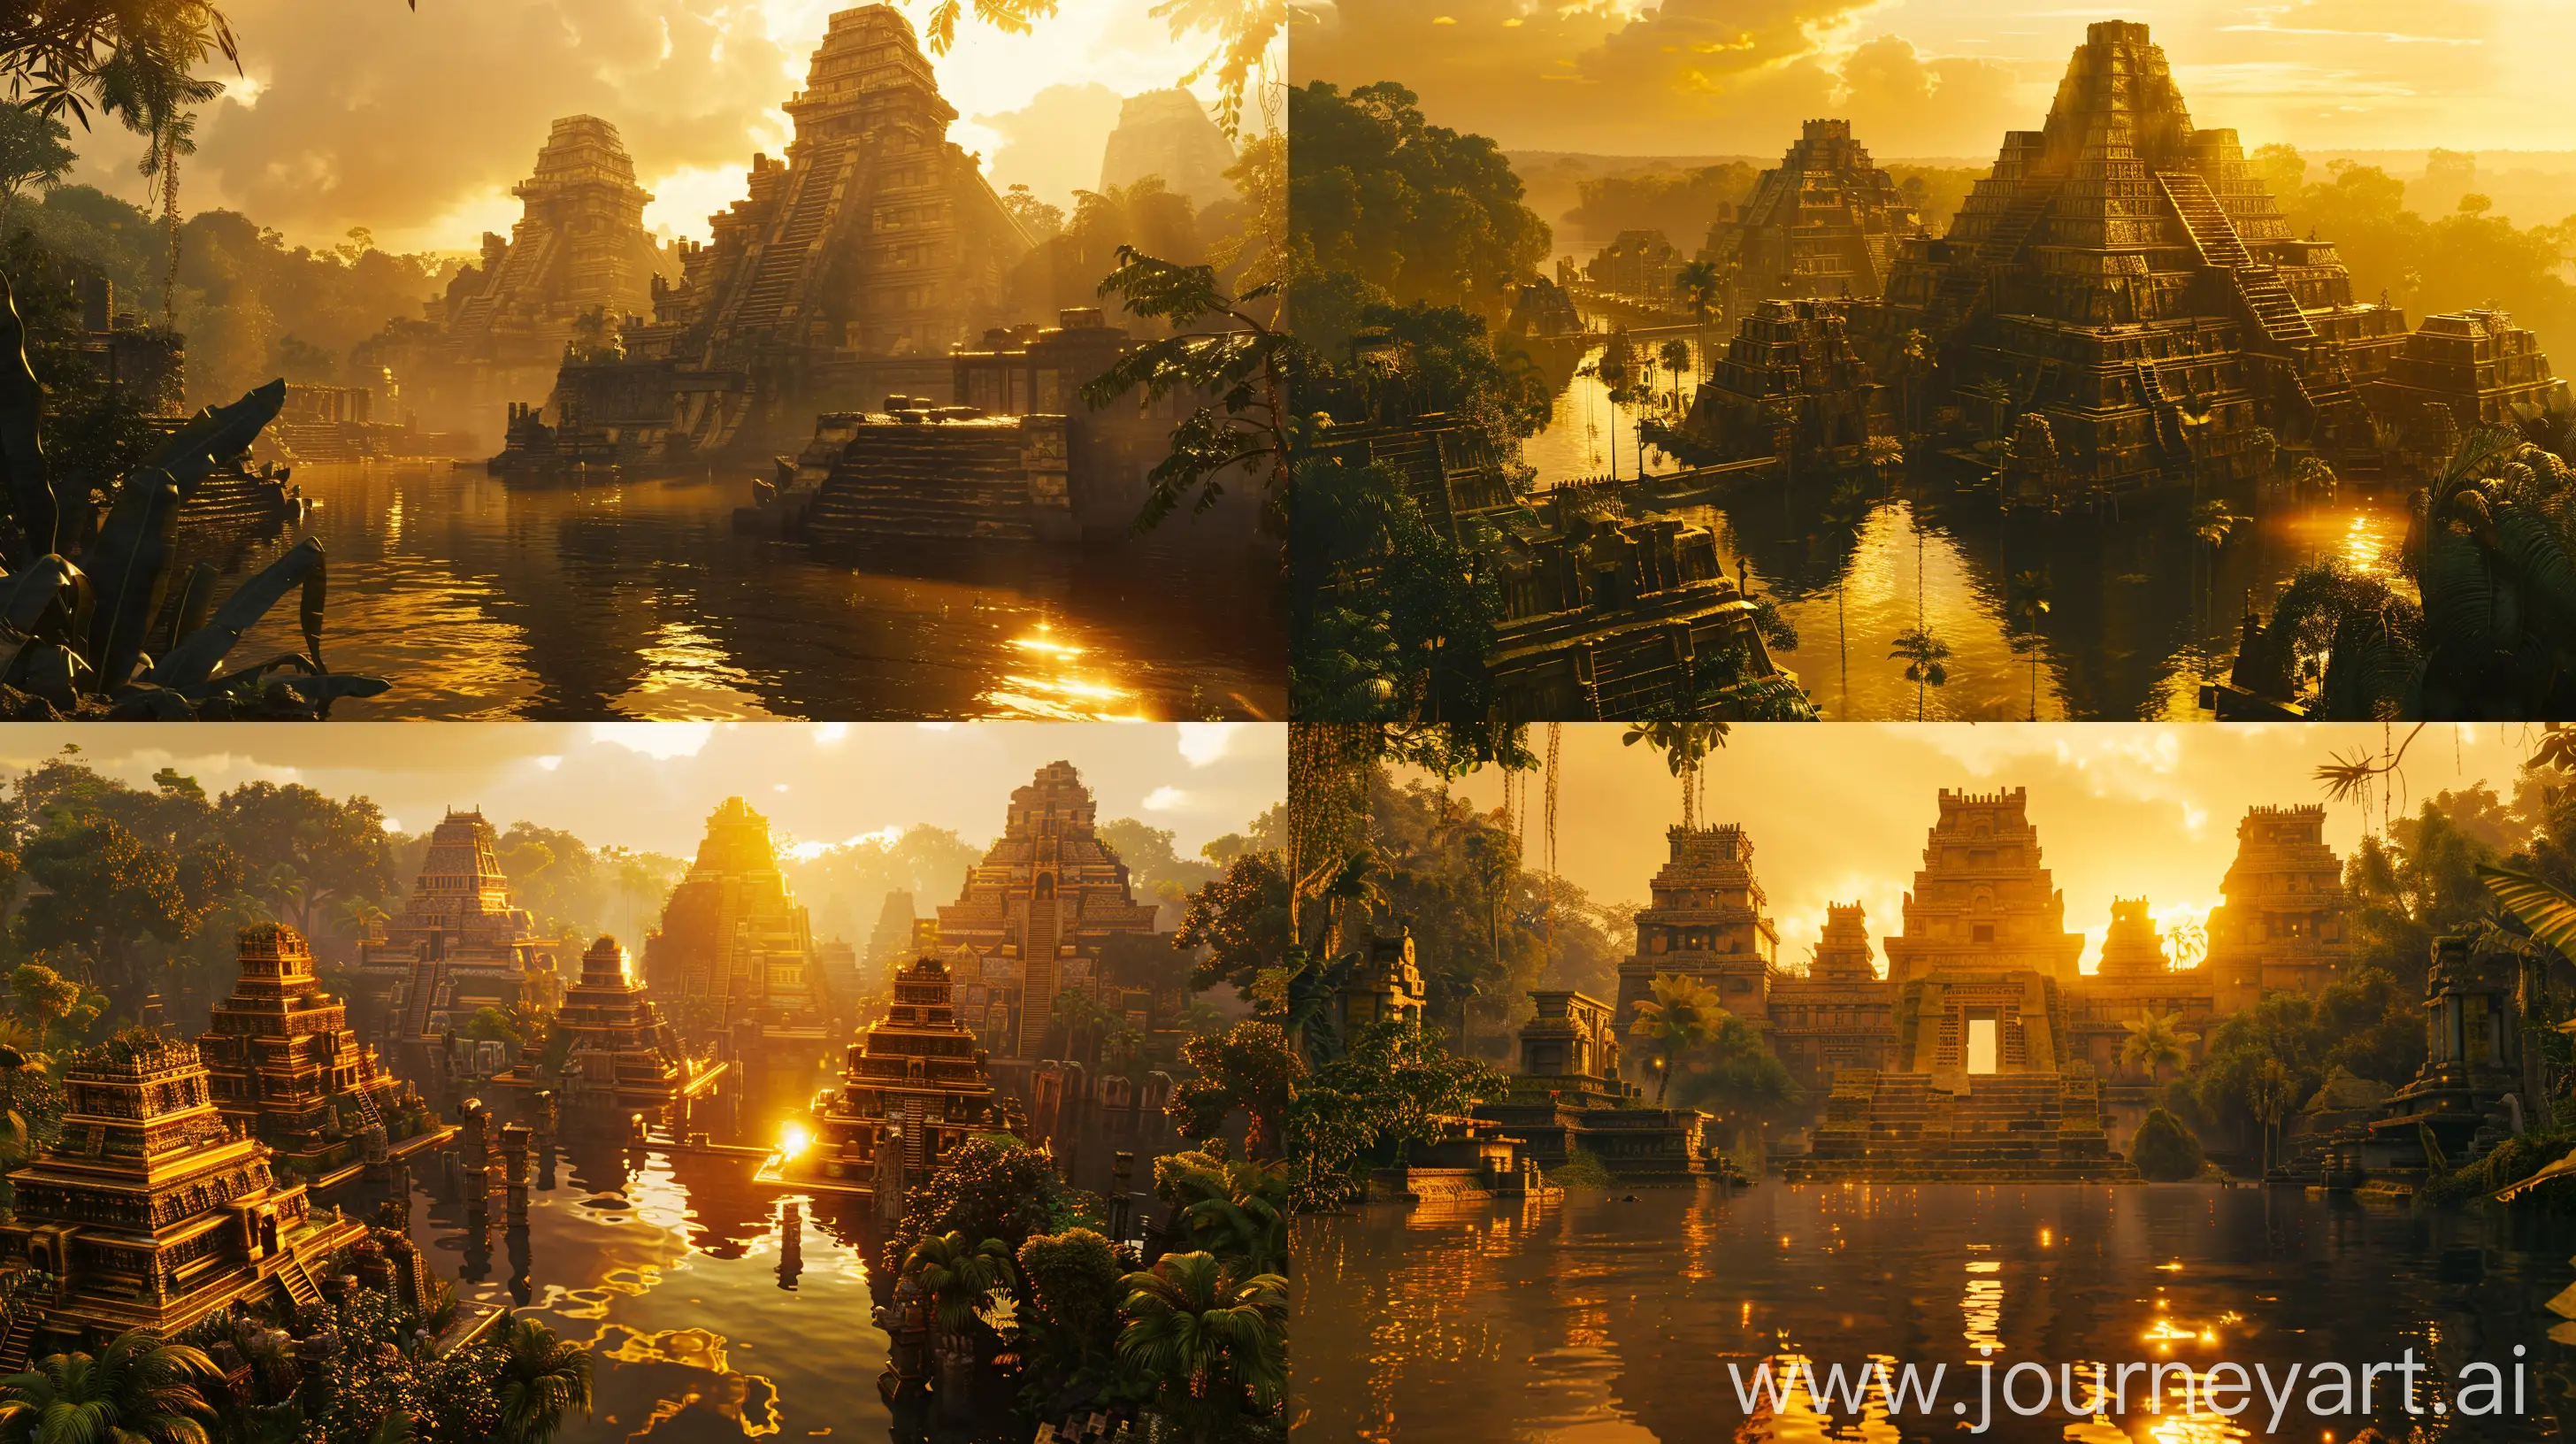 Breathtaking cinematic shot of the ancient Amazon city El Dorado, first-person perspective, ARRI Alexa 65 quality, golden sunrise light bathing the intricate architecture, lush jungle surroundings, hyper-realistic textures, shimmering reflections on water, sense of awe and discovery --ar 16:9 --v 6